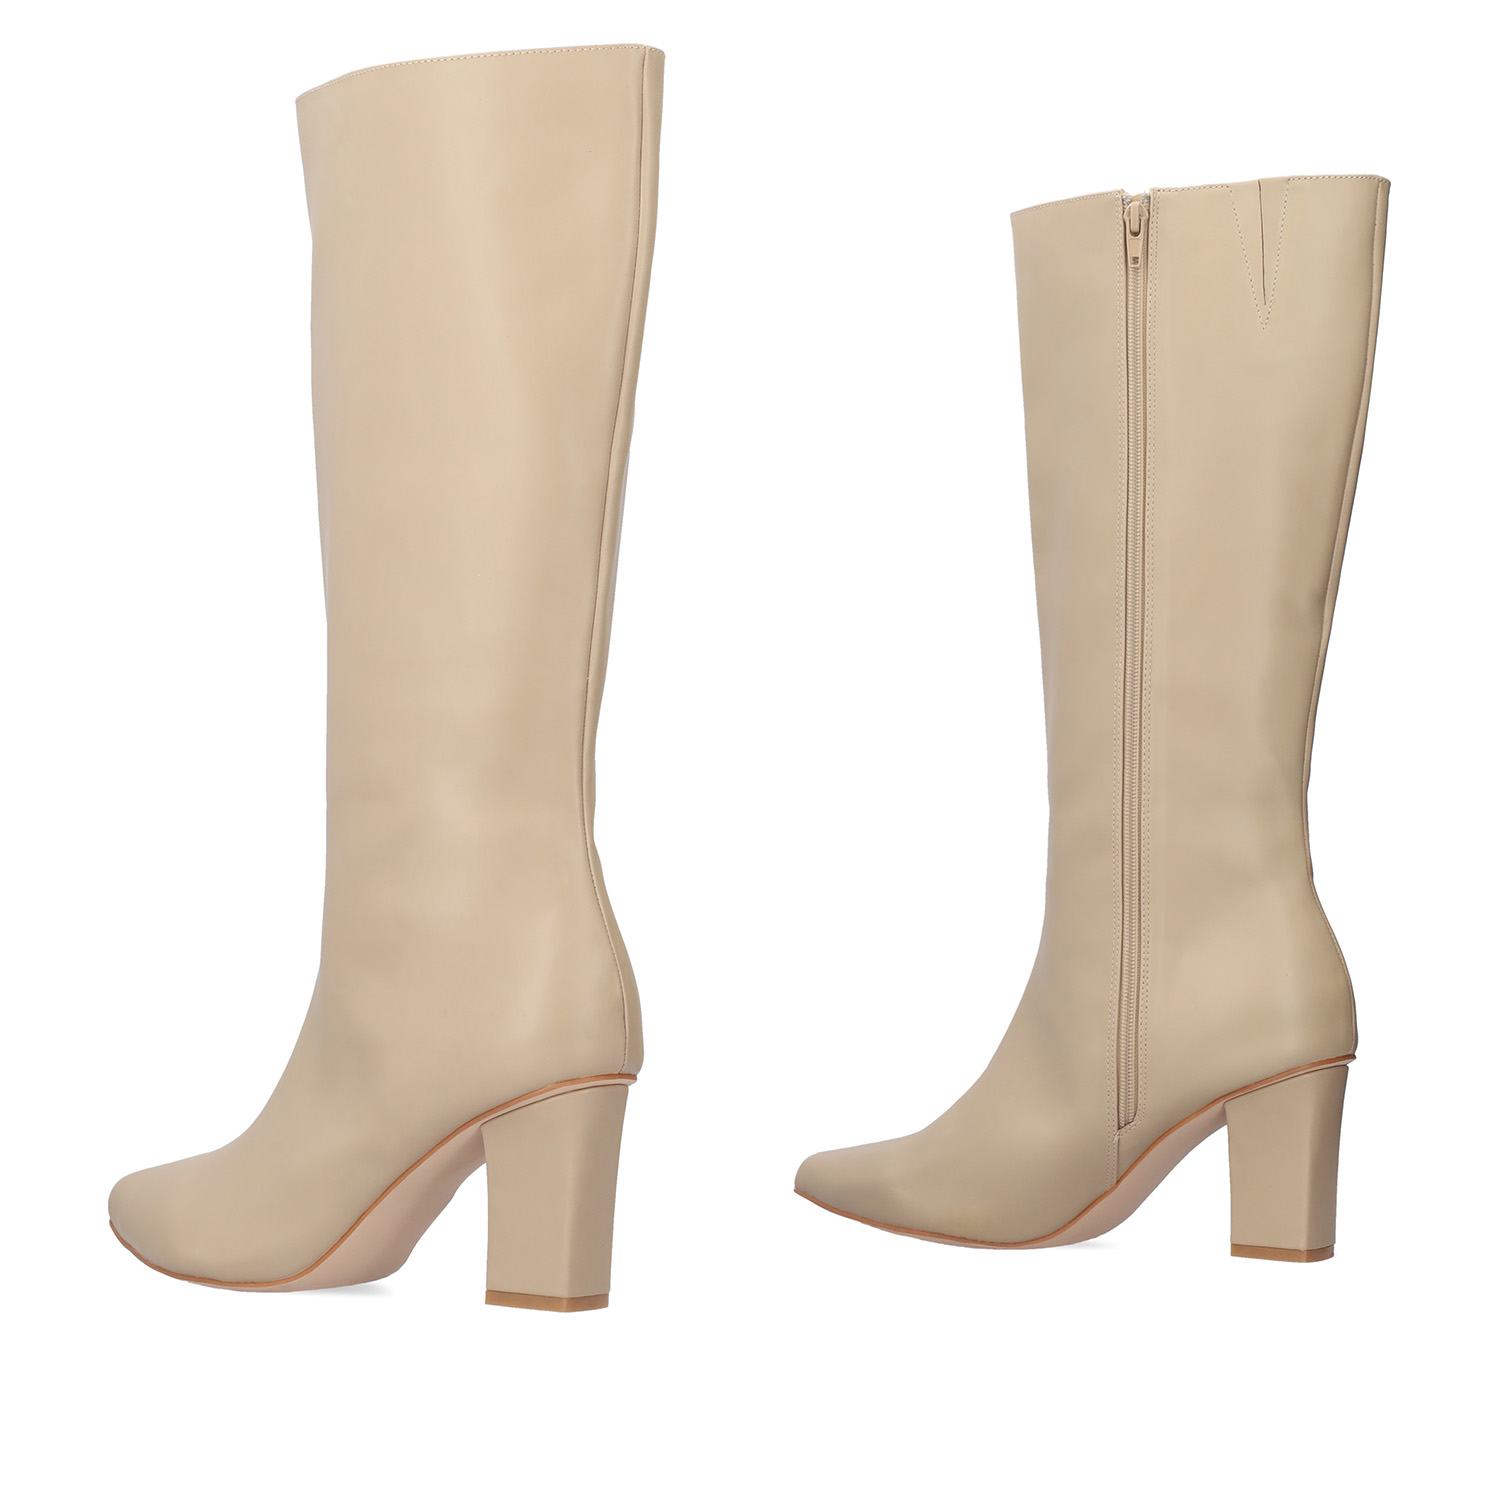 Smooth beige colored faux leather boots 